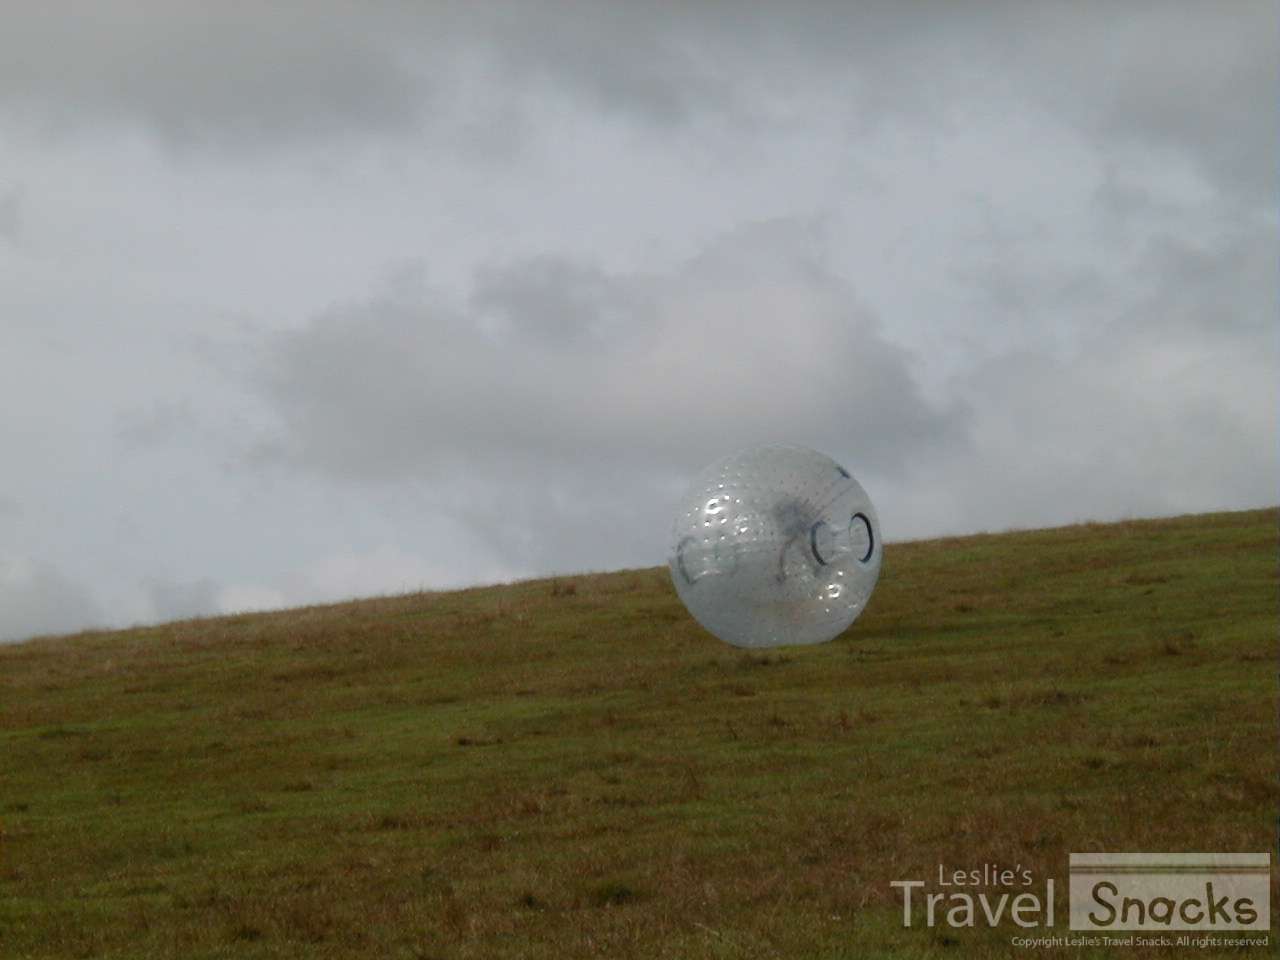 That's me rolling down the hill in a giant hamster ball. LOL